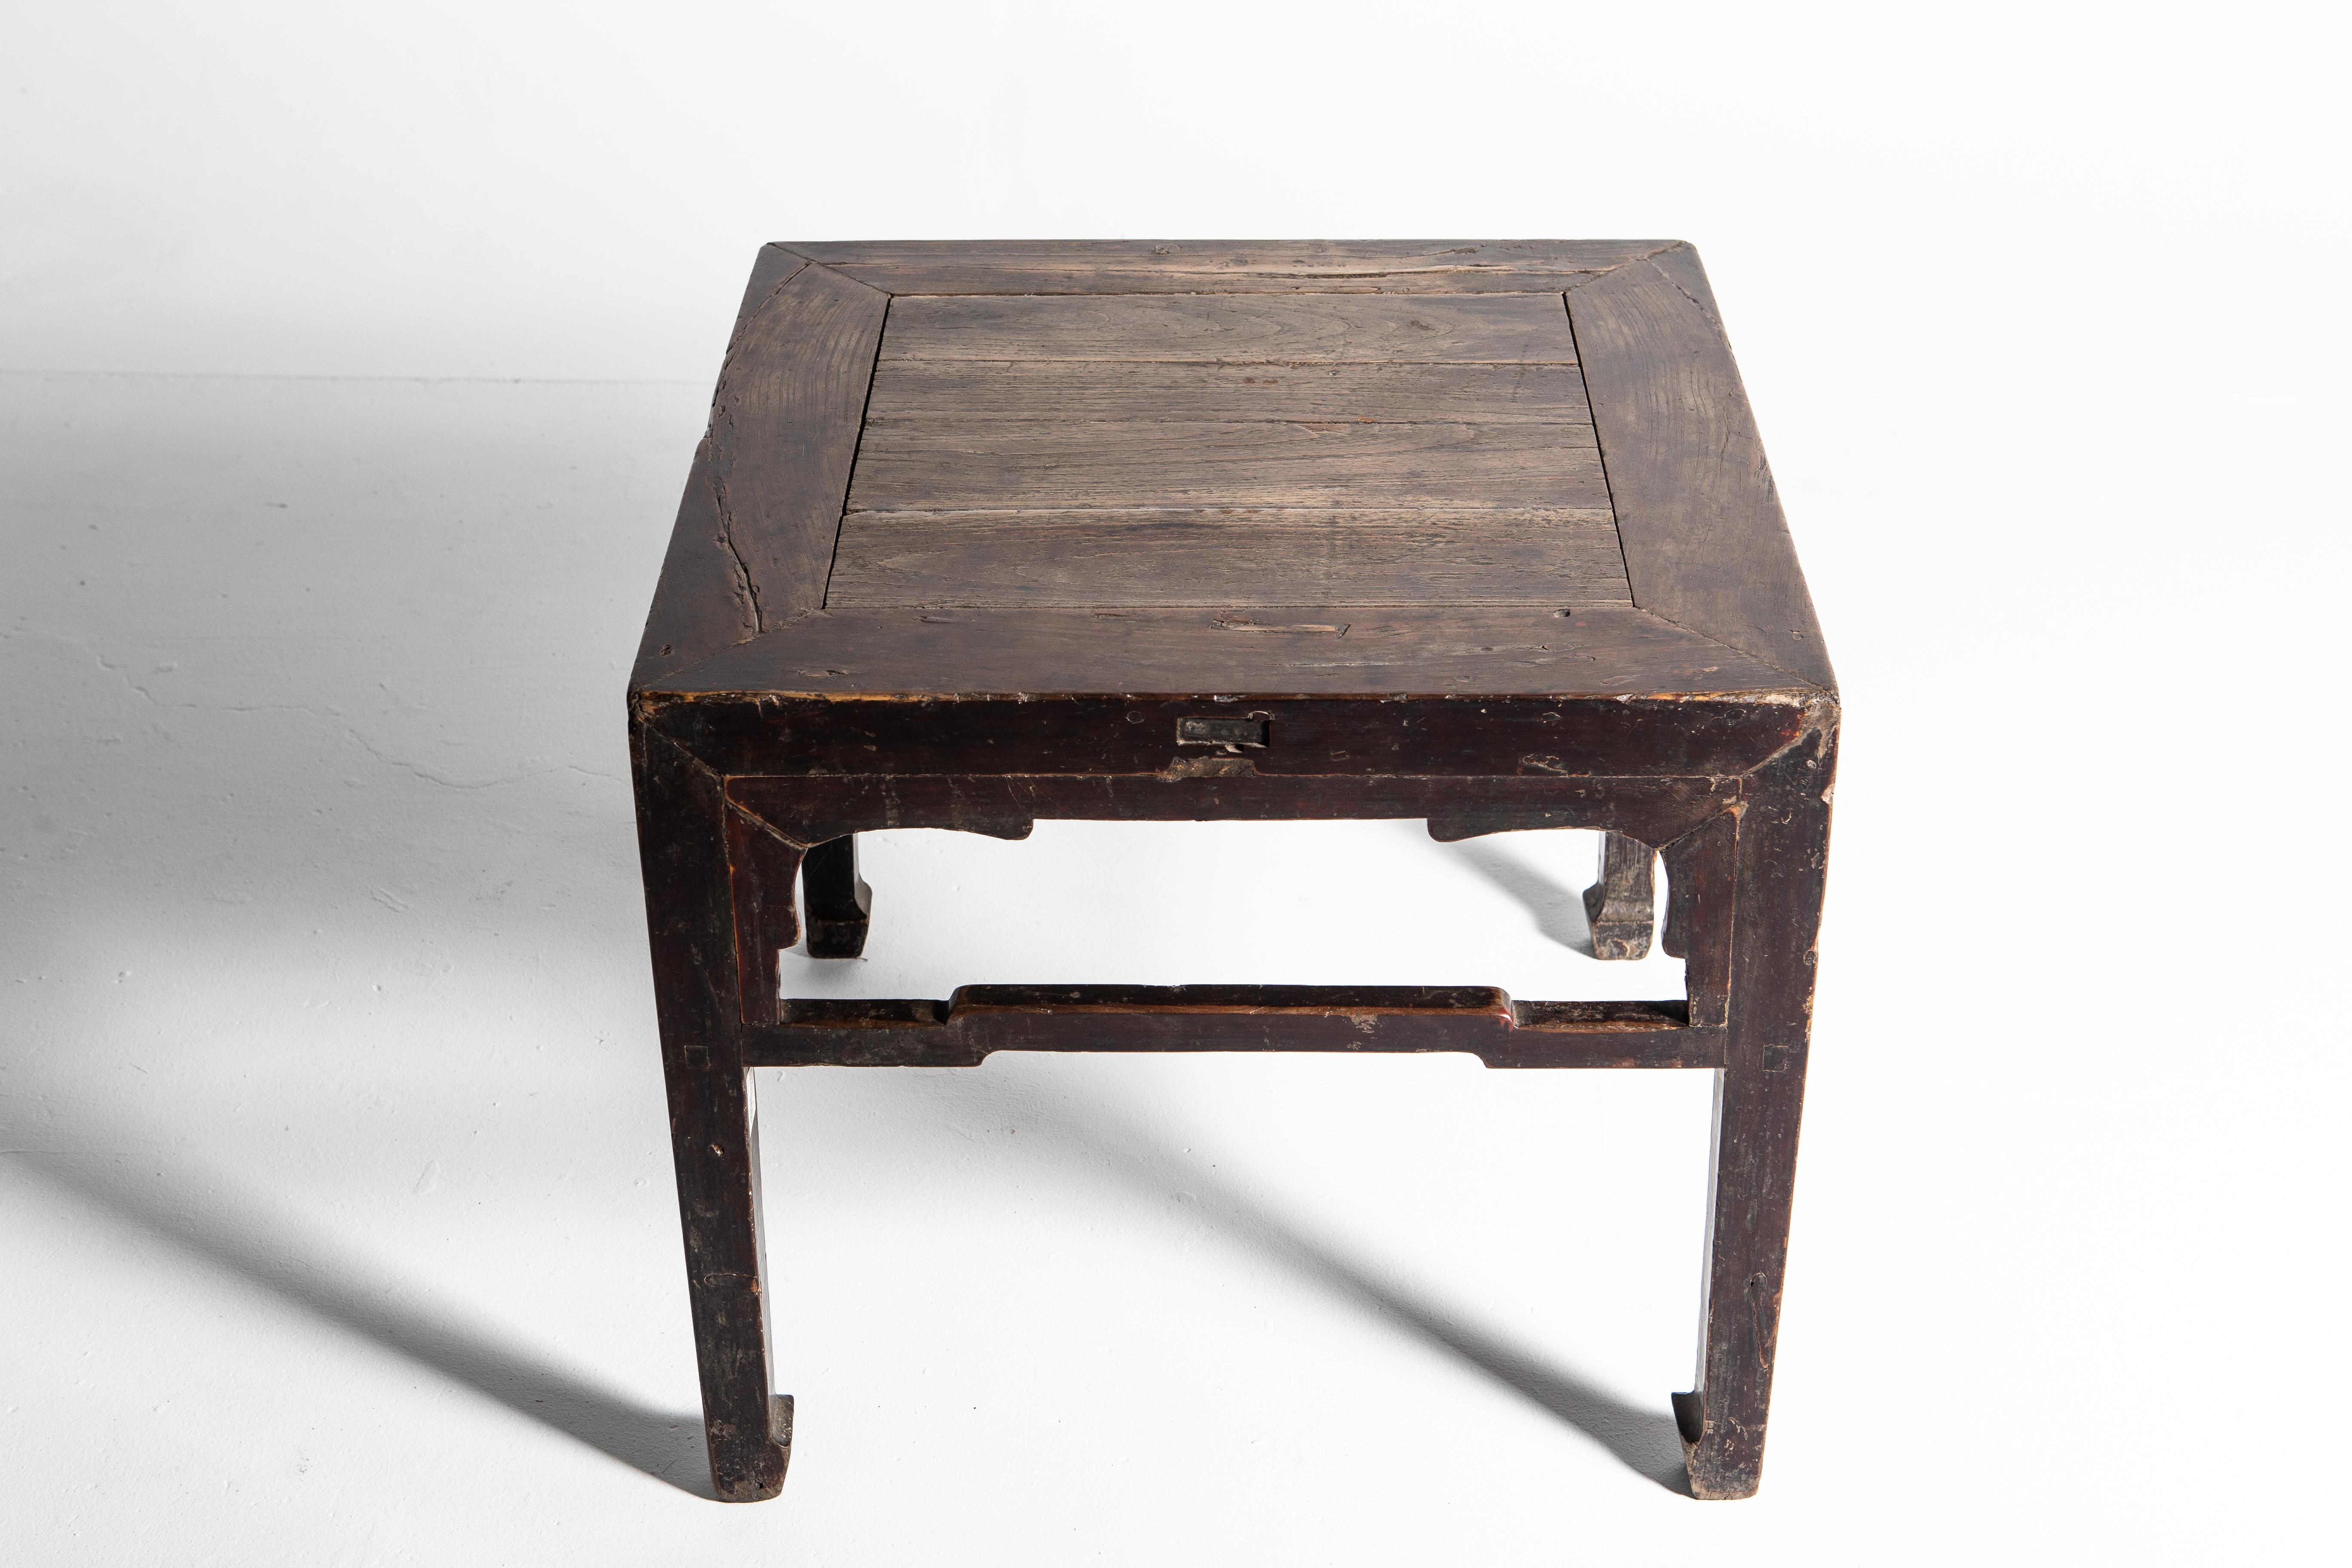 This small side table dates to the middle-Qing dynasty. The piece is made of elmwood and features humpback stretchers and a beautifully aged patina.